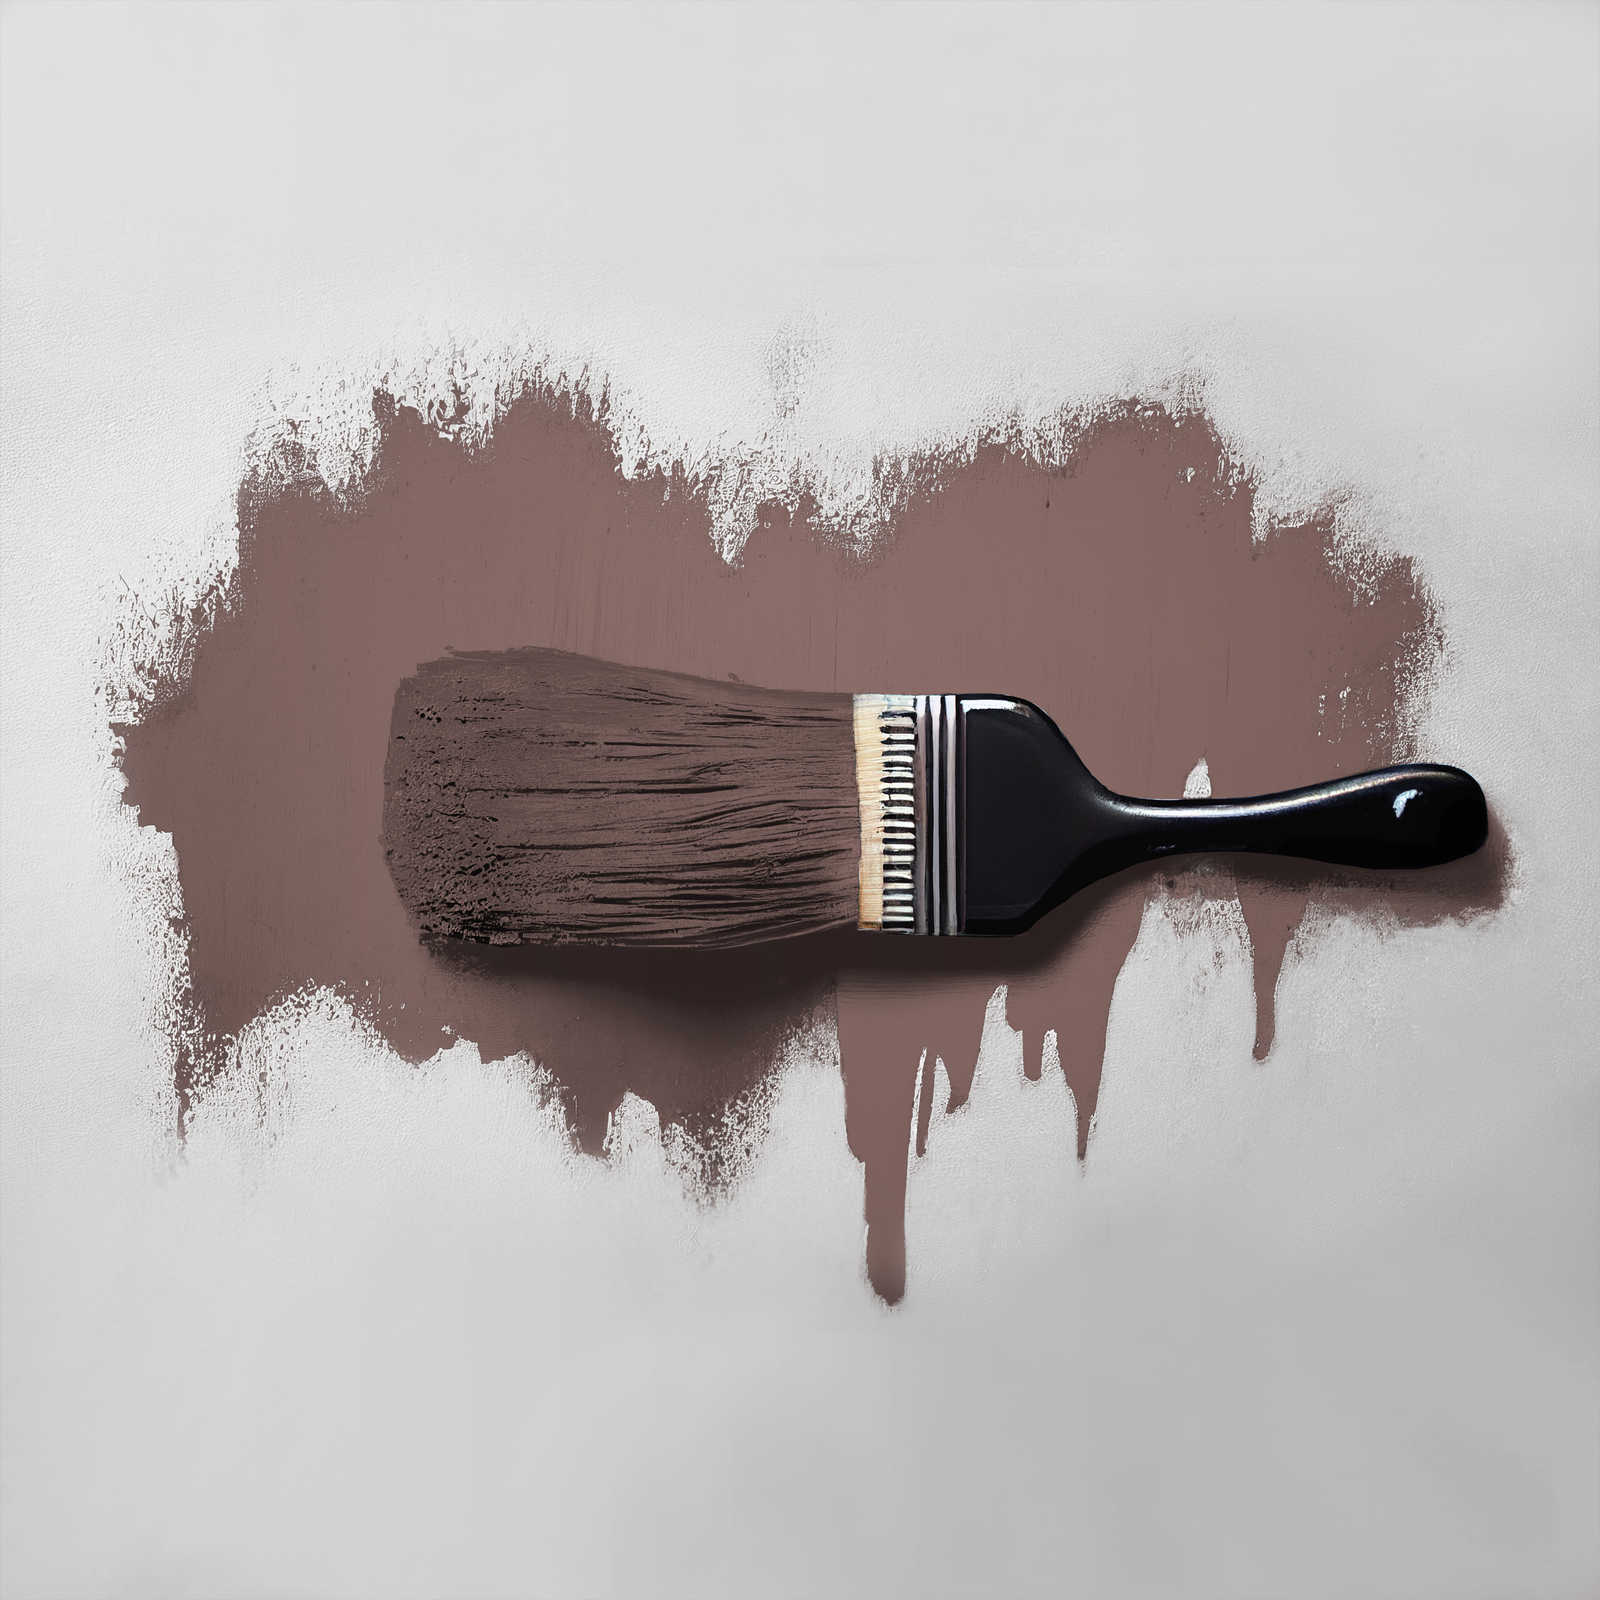             Wall Paint TCK5015 »Passion Fruit« in reddish brown – 2.5 litre
        